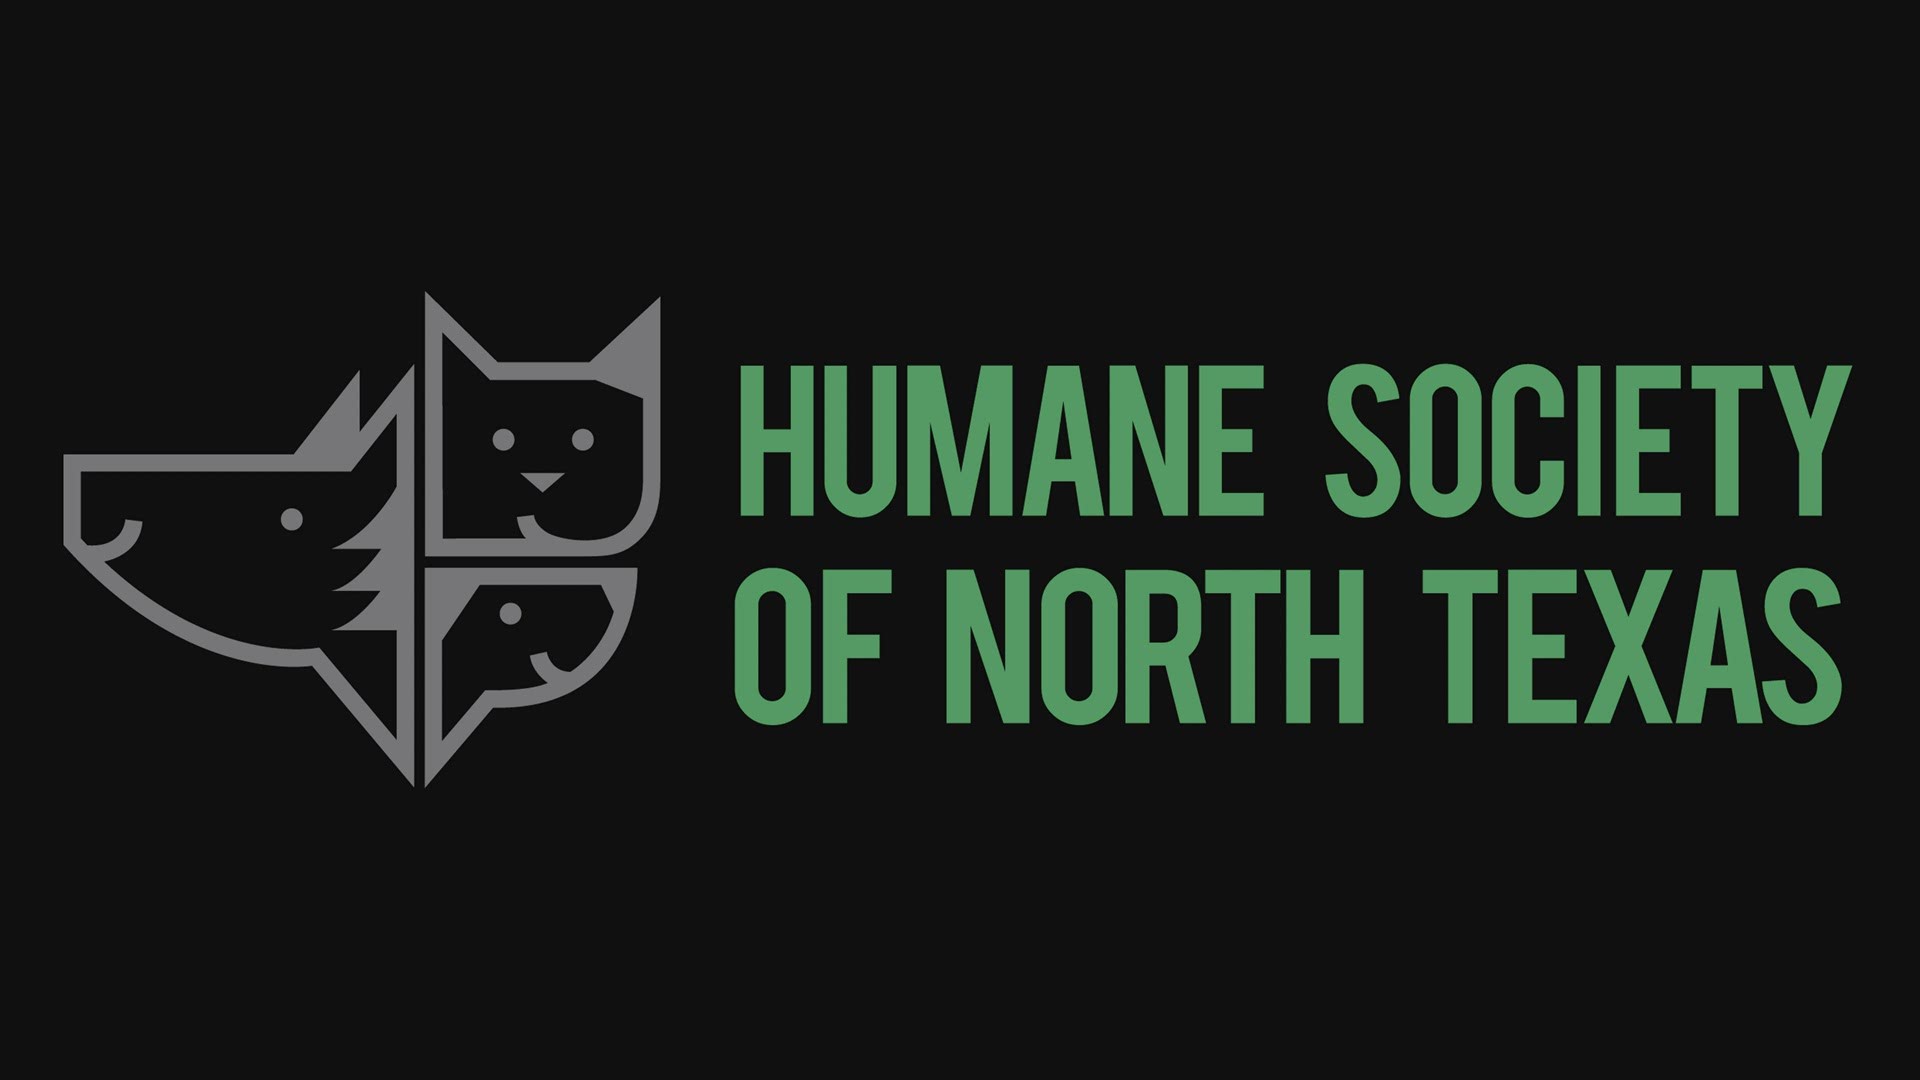 In May, the Humane Society of North Texas flew more than 140 animals from foster care to Waukesha's Humane Animal Welfare Society.